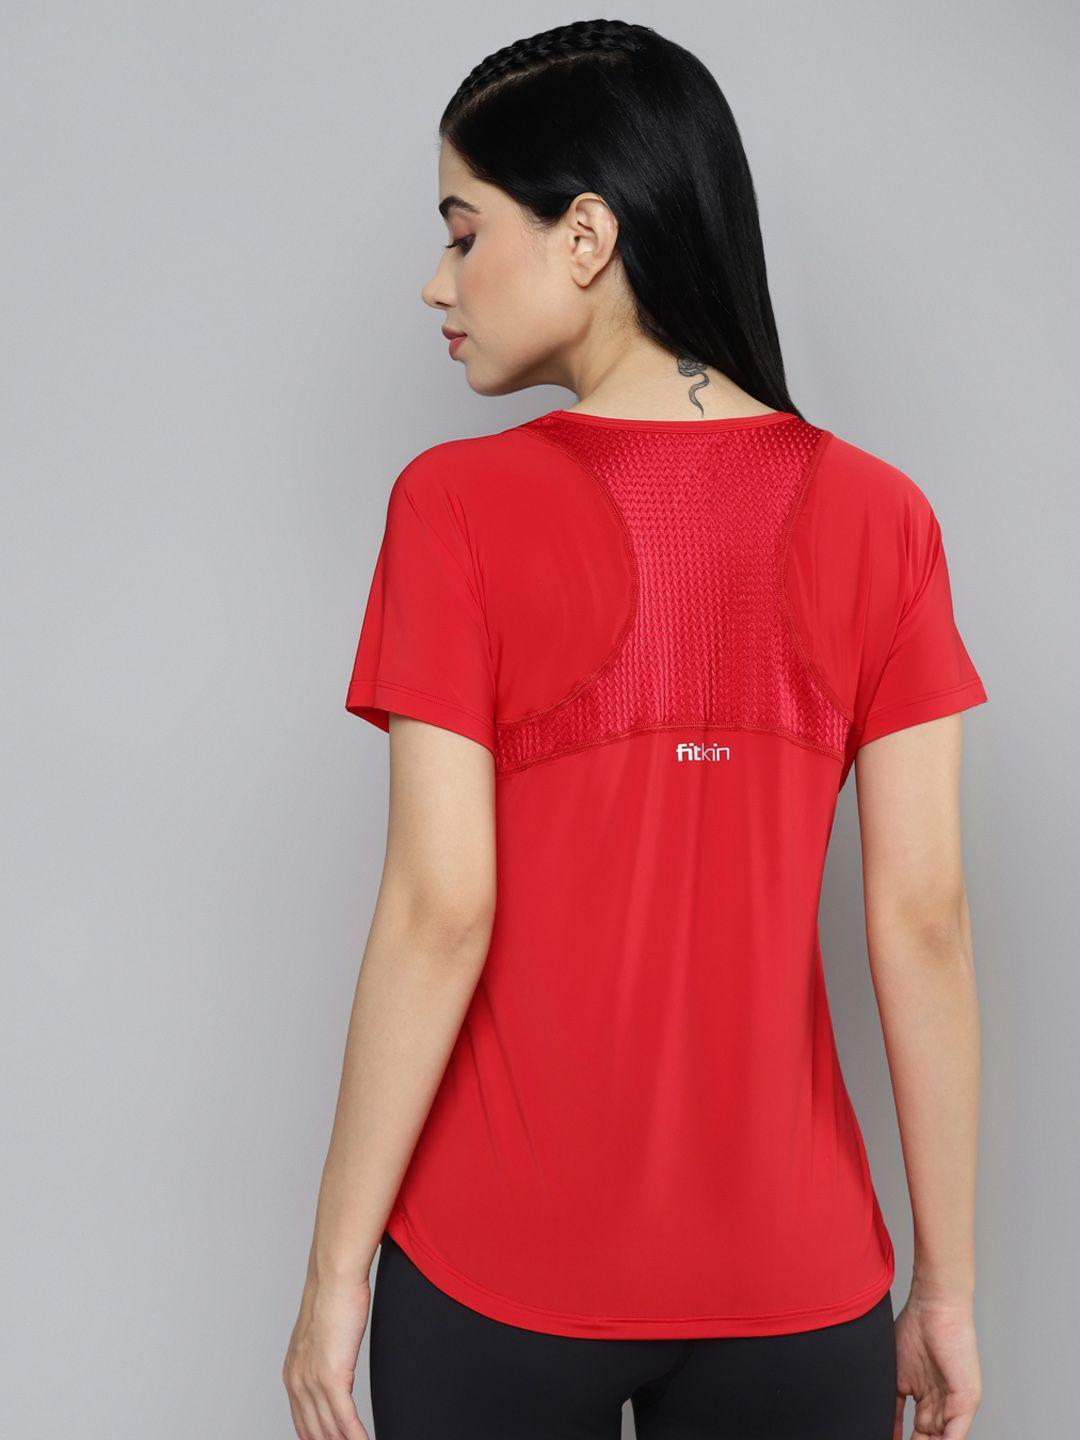 fitkin-women-red-solid-t-shirt